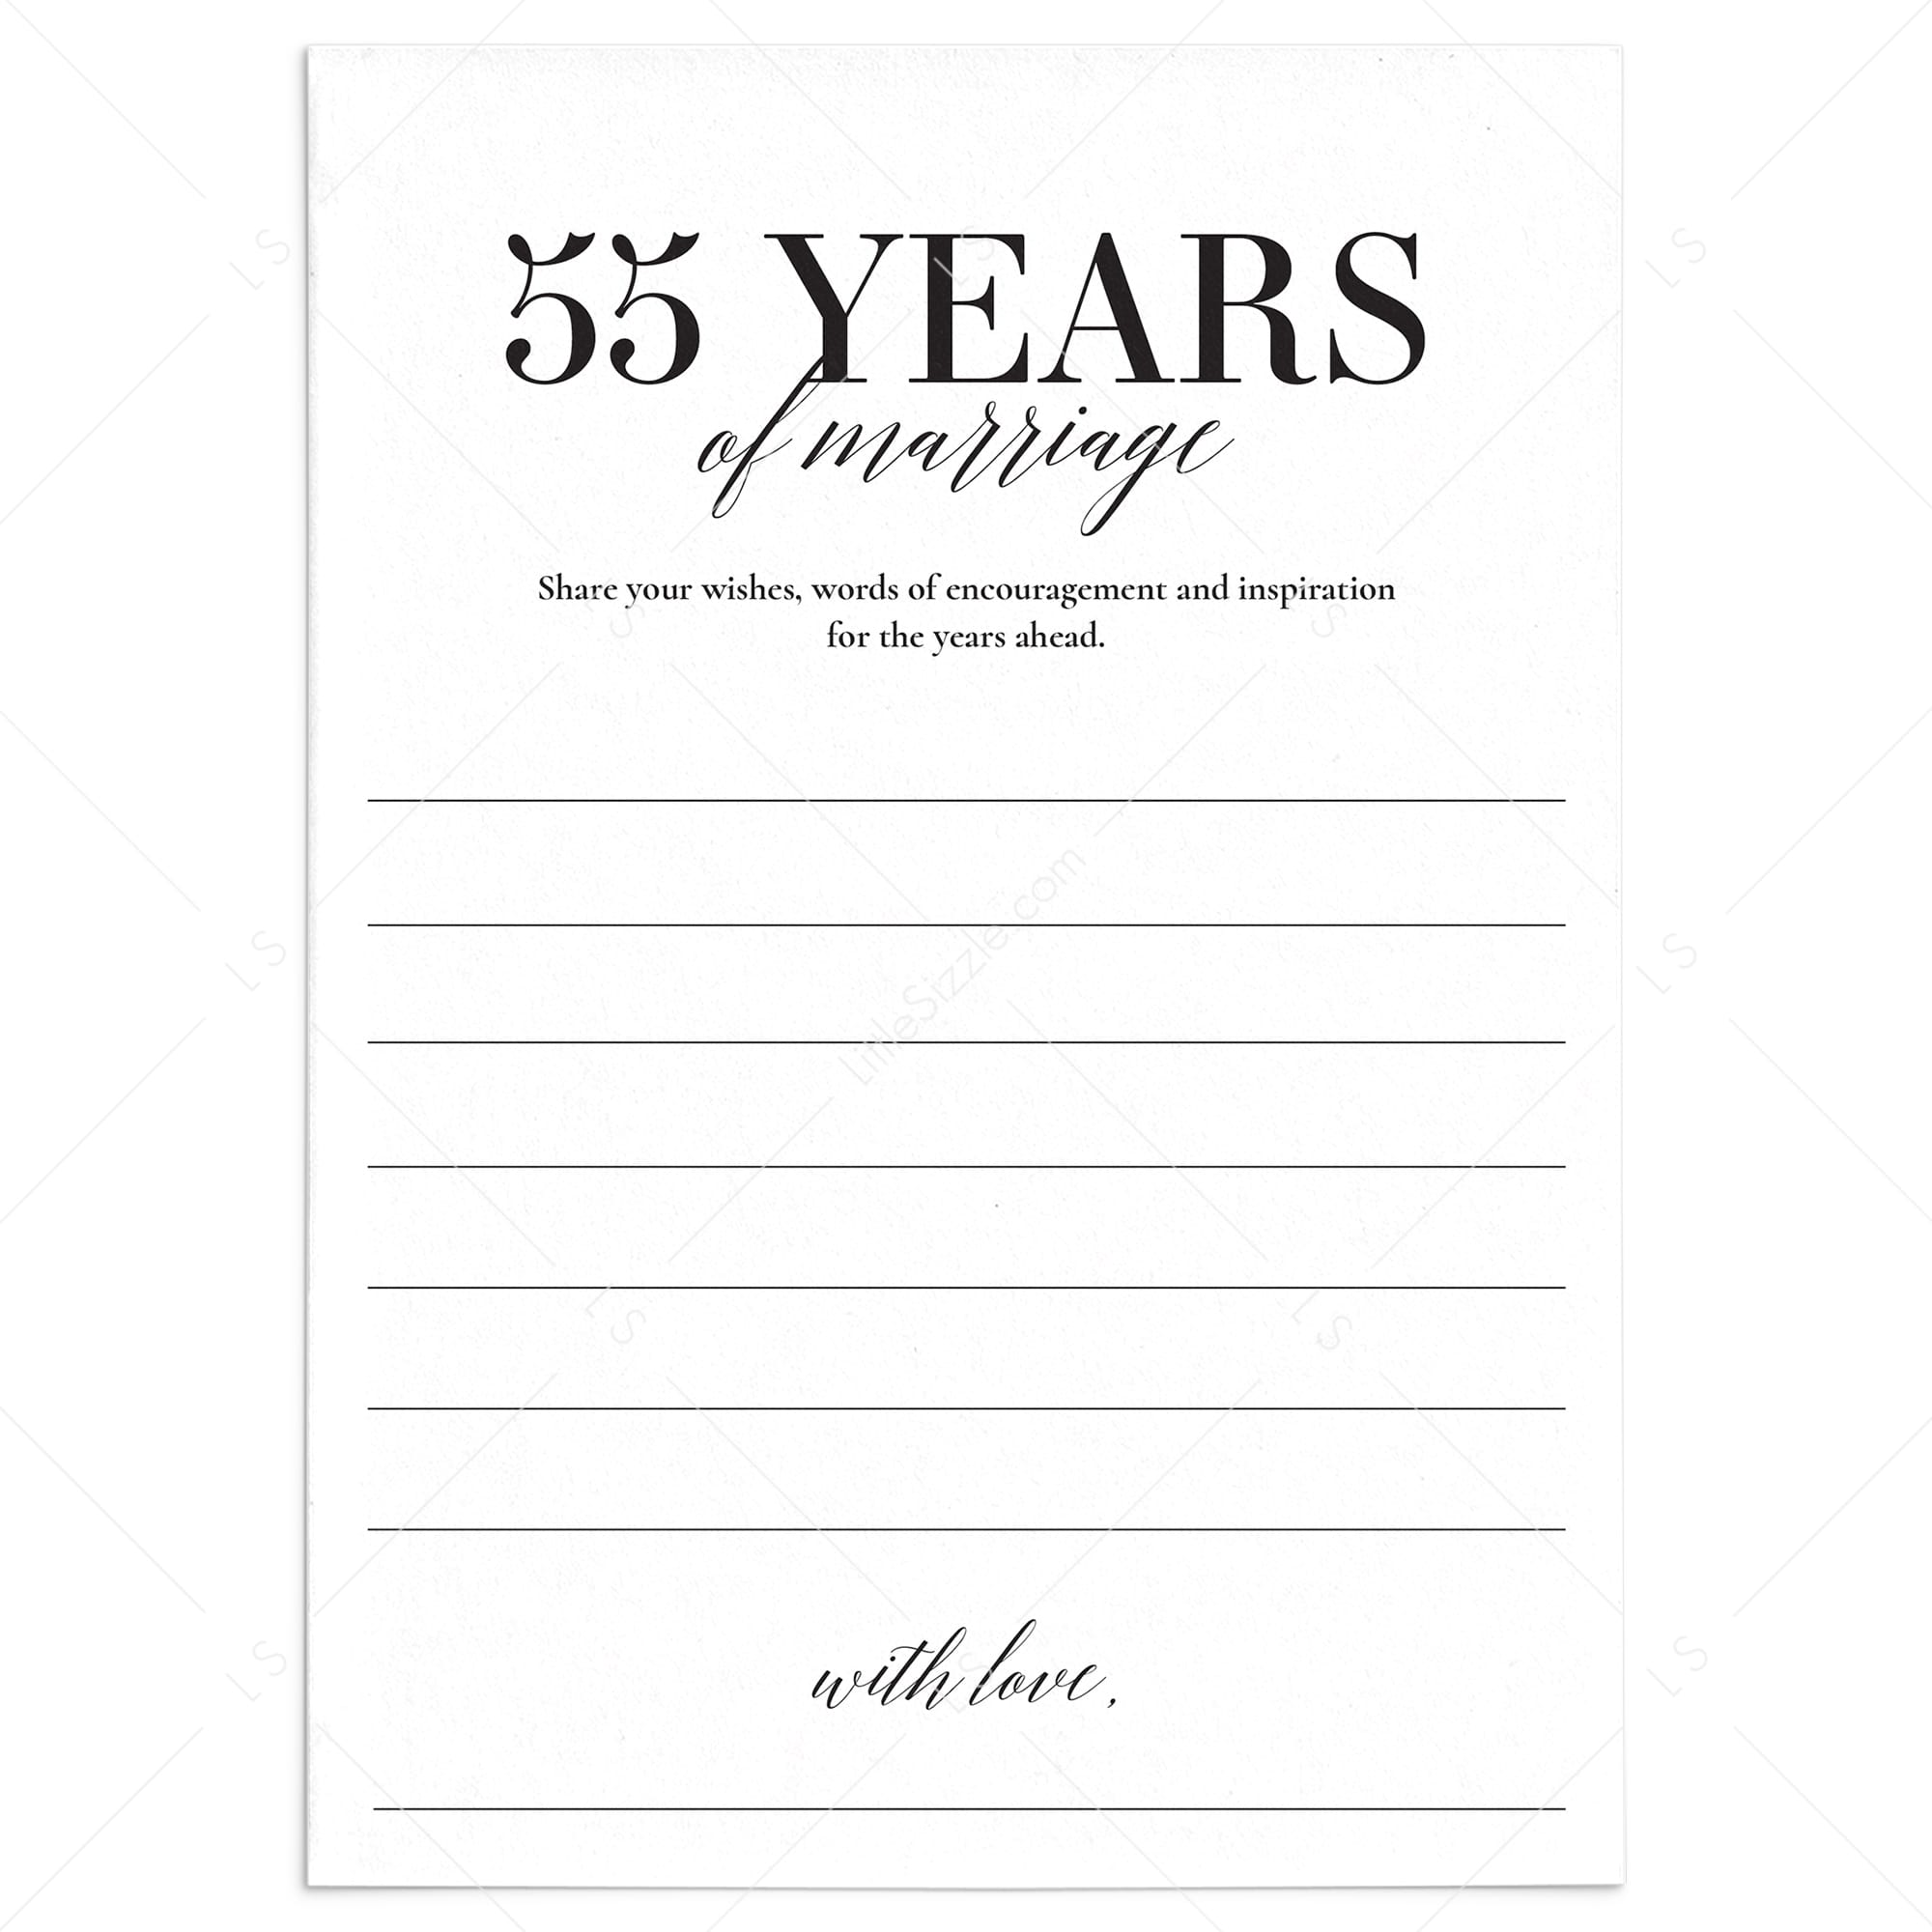 55th Wedding Anniversary Wishes & Advice Card Printable by LittleSizzle